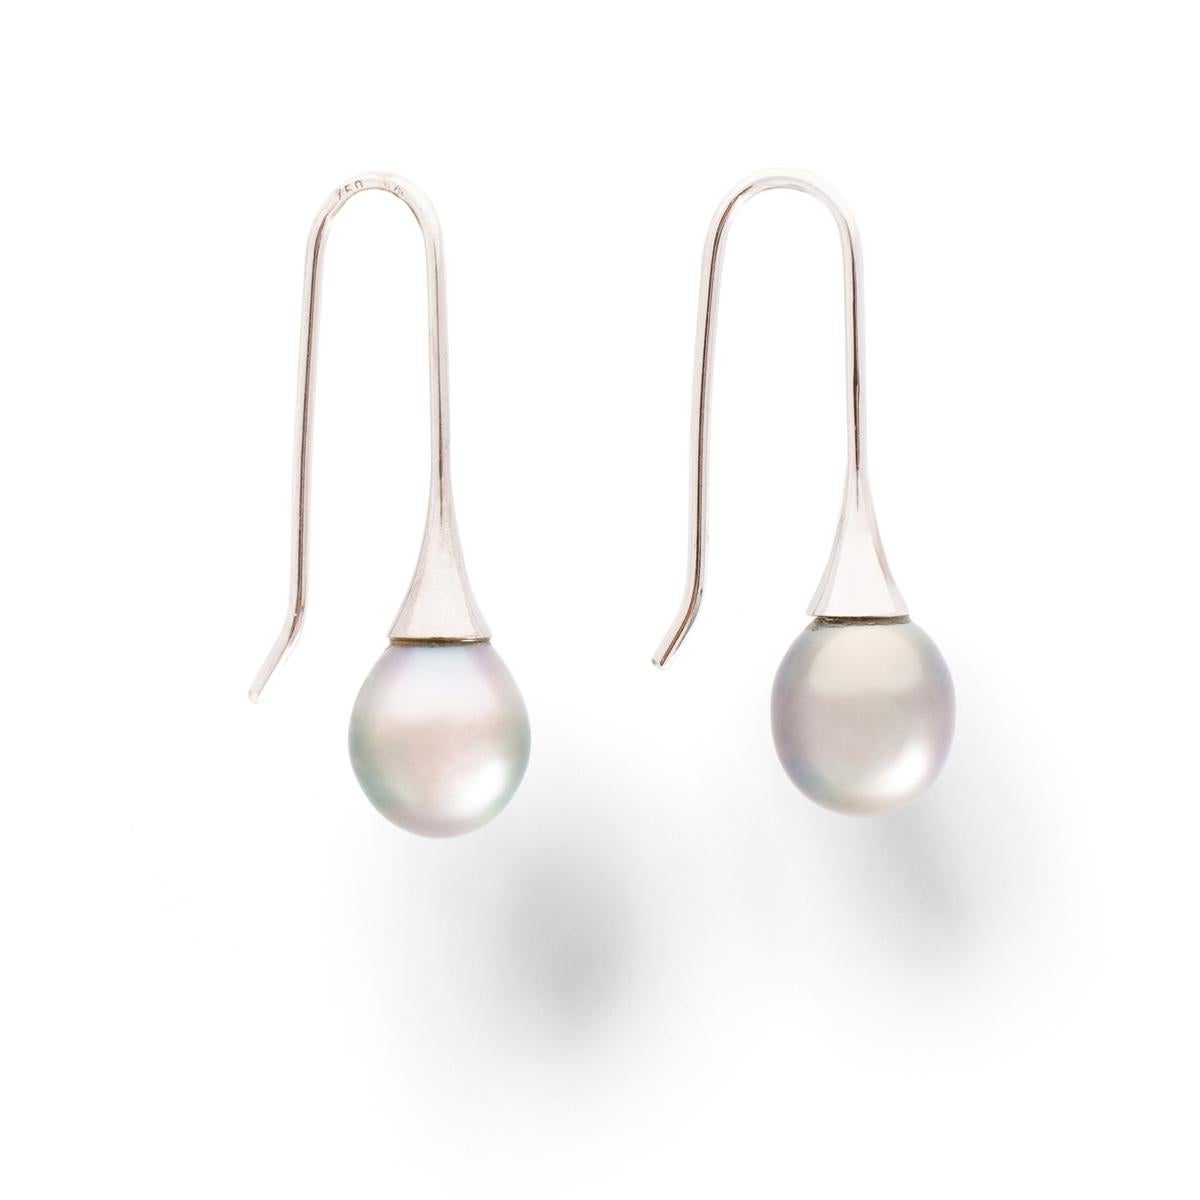 Earrings Pearl Drop White Gold.
Pearl height: Approximately 11.05 millimeters each.
Pearl width: Approximately 9.13 millimeters each.
Total length: 3.20 centimeters.
Gross weight: 4.59 grams.
